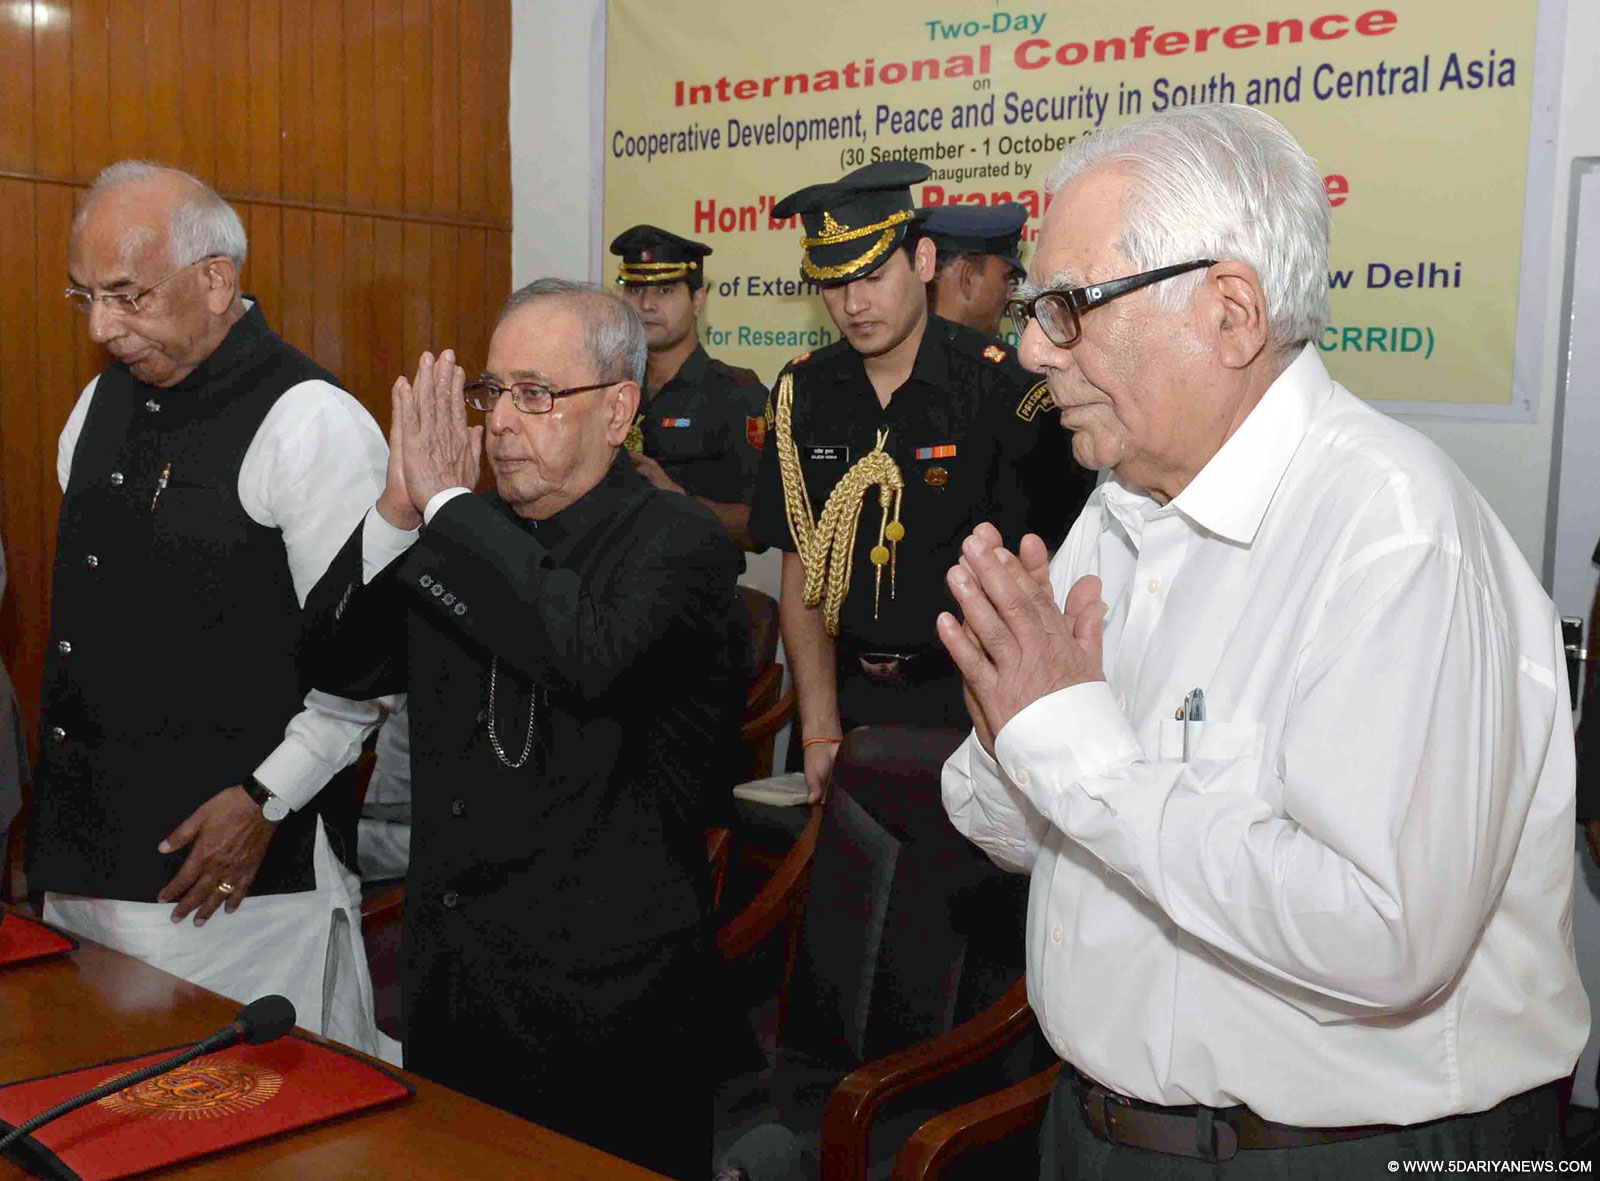  The President, Shri Pranab Mukherjee addressing at the International Conference on Project/Programme “Cooperative Development Peace and Security in South & Central Asia”, at Chandigarh on September 30, 2015. The Governor of Punjab and Haryana and Administrator, Union Territory, Chandigarh, Prof. Kaptan Singh Solanki is also seen.